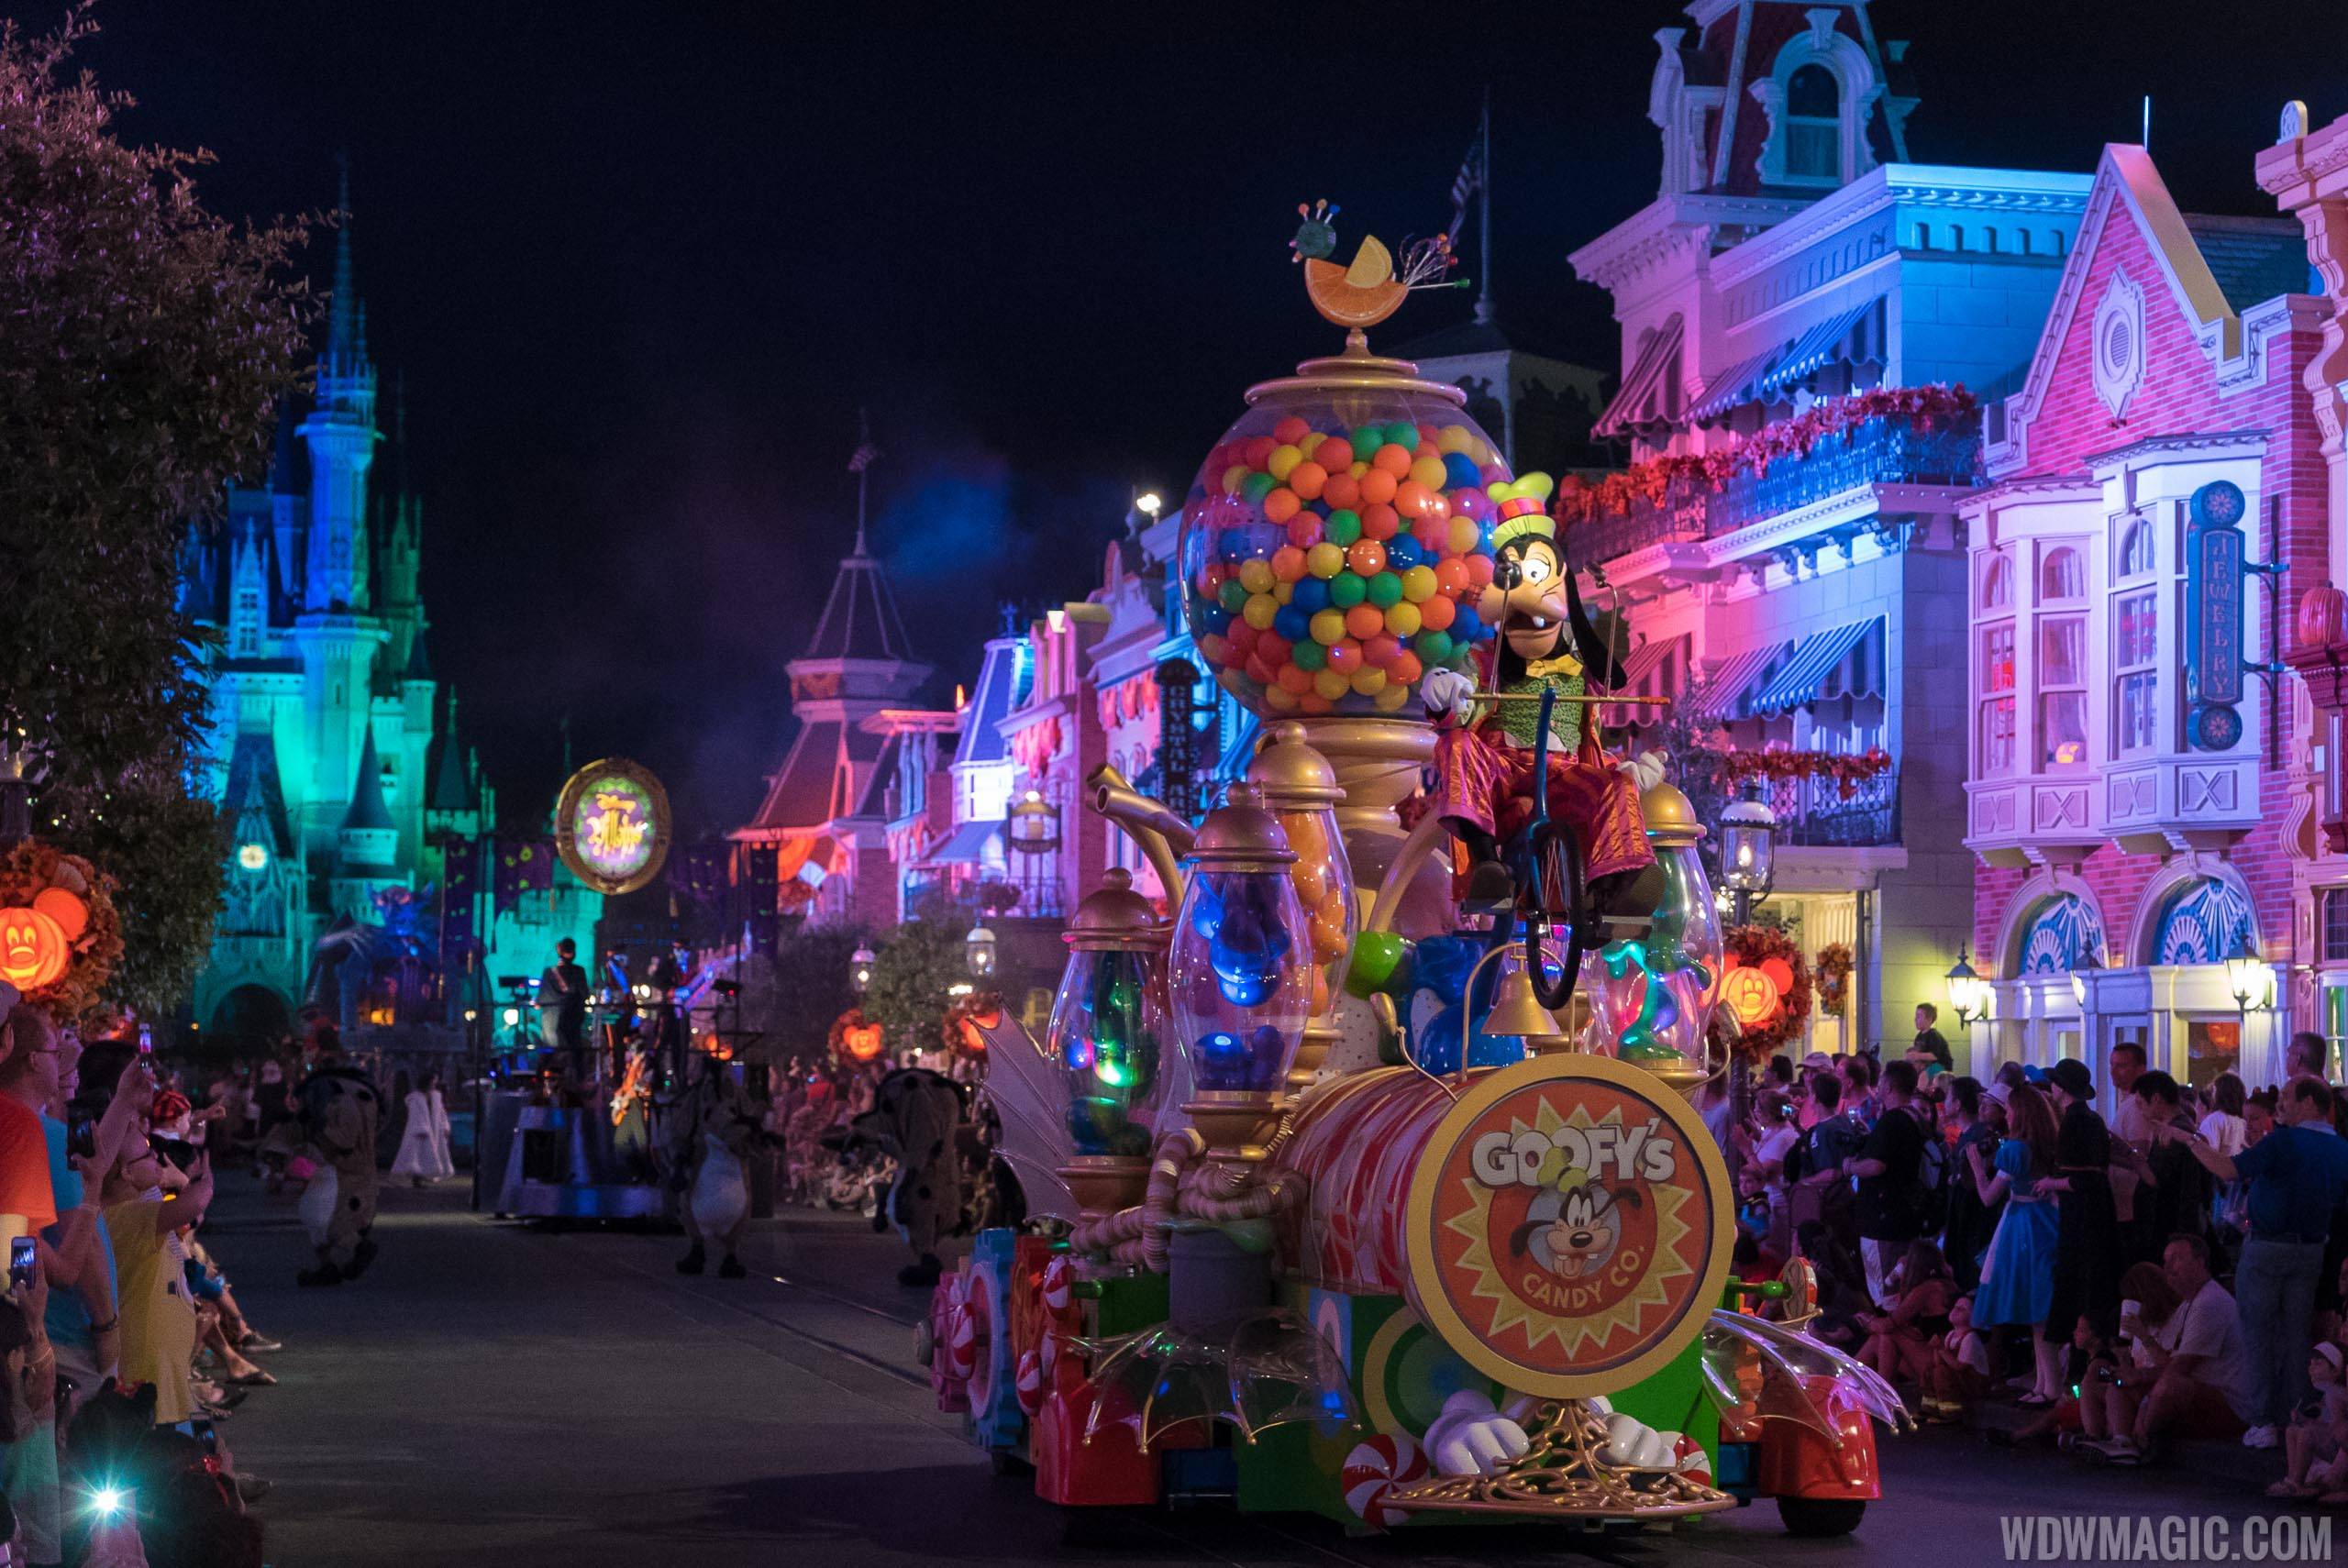 Mickey's Boo to You Halloween Parade - Goofy's Candy Co Float